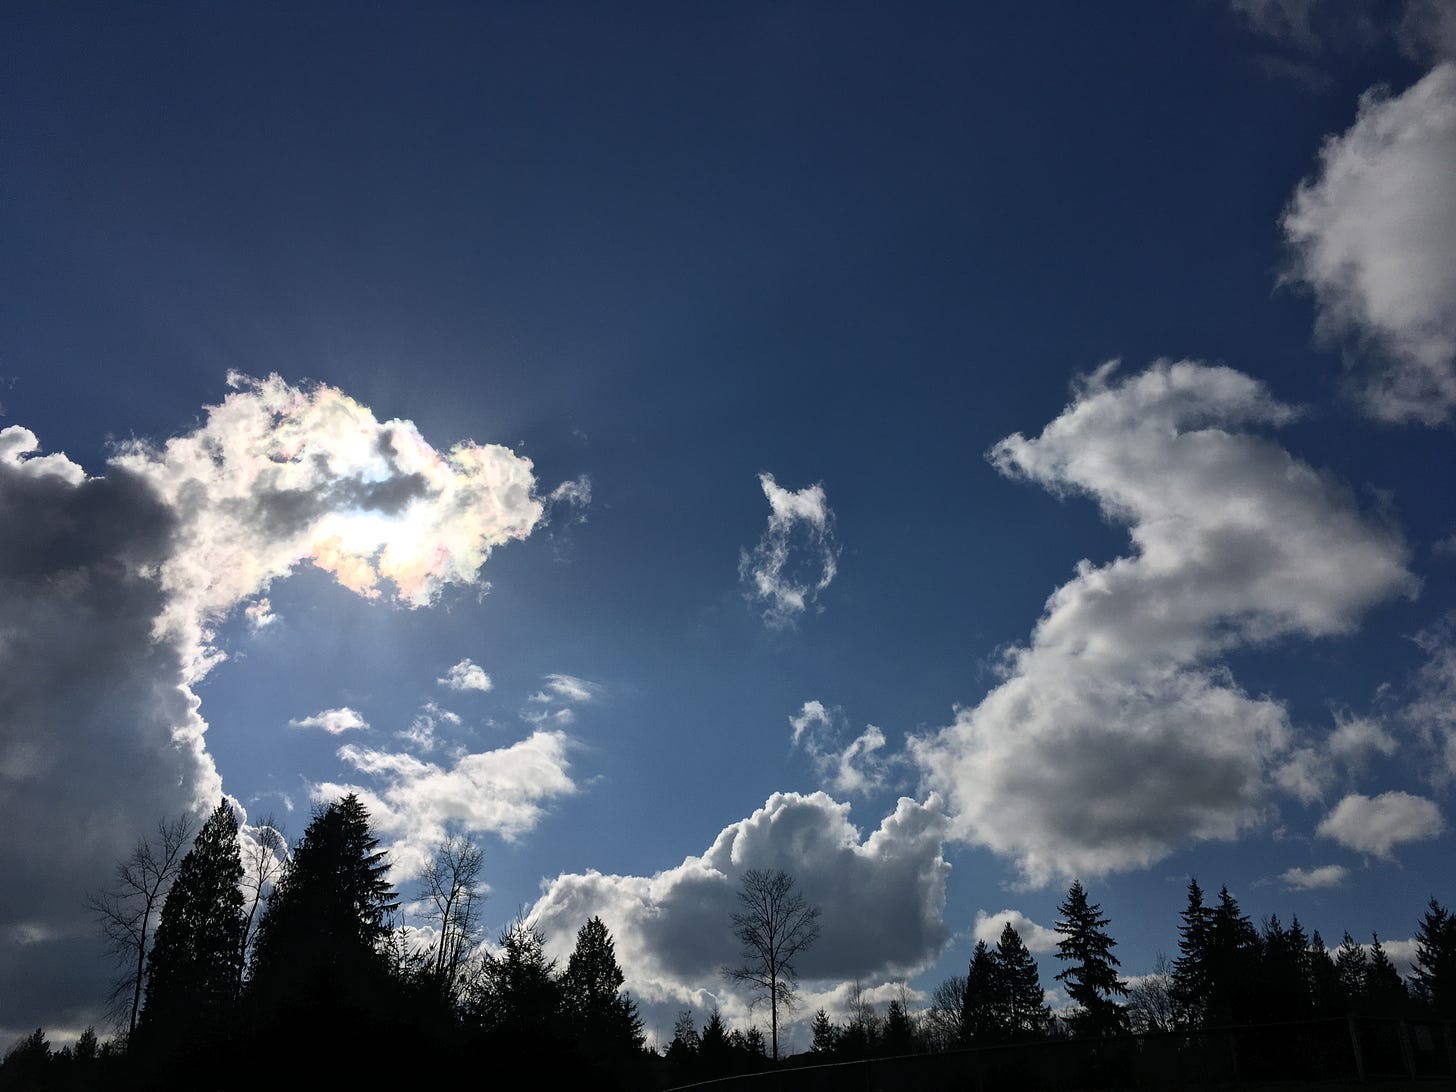 from yesterday: blue skies and clouds in shapes, one cloud just covering the sun. evergreen trees and a few deciduous standing at the base of the image, beneath the skies. 